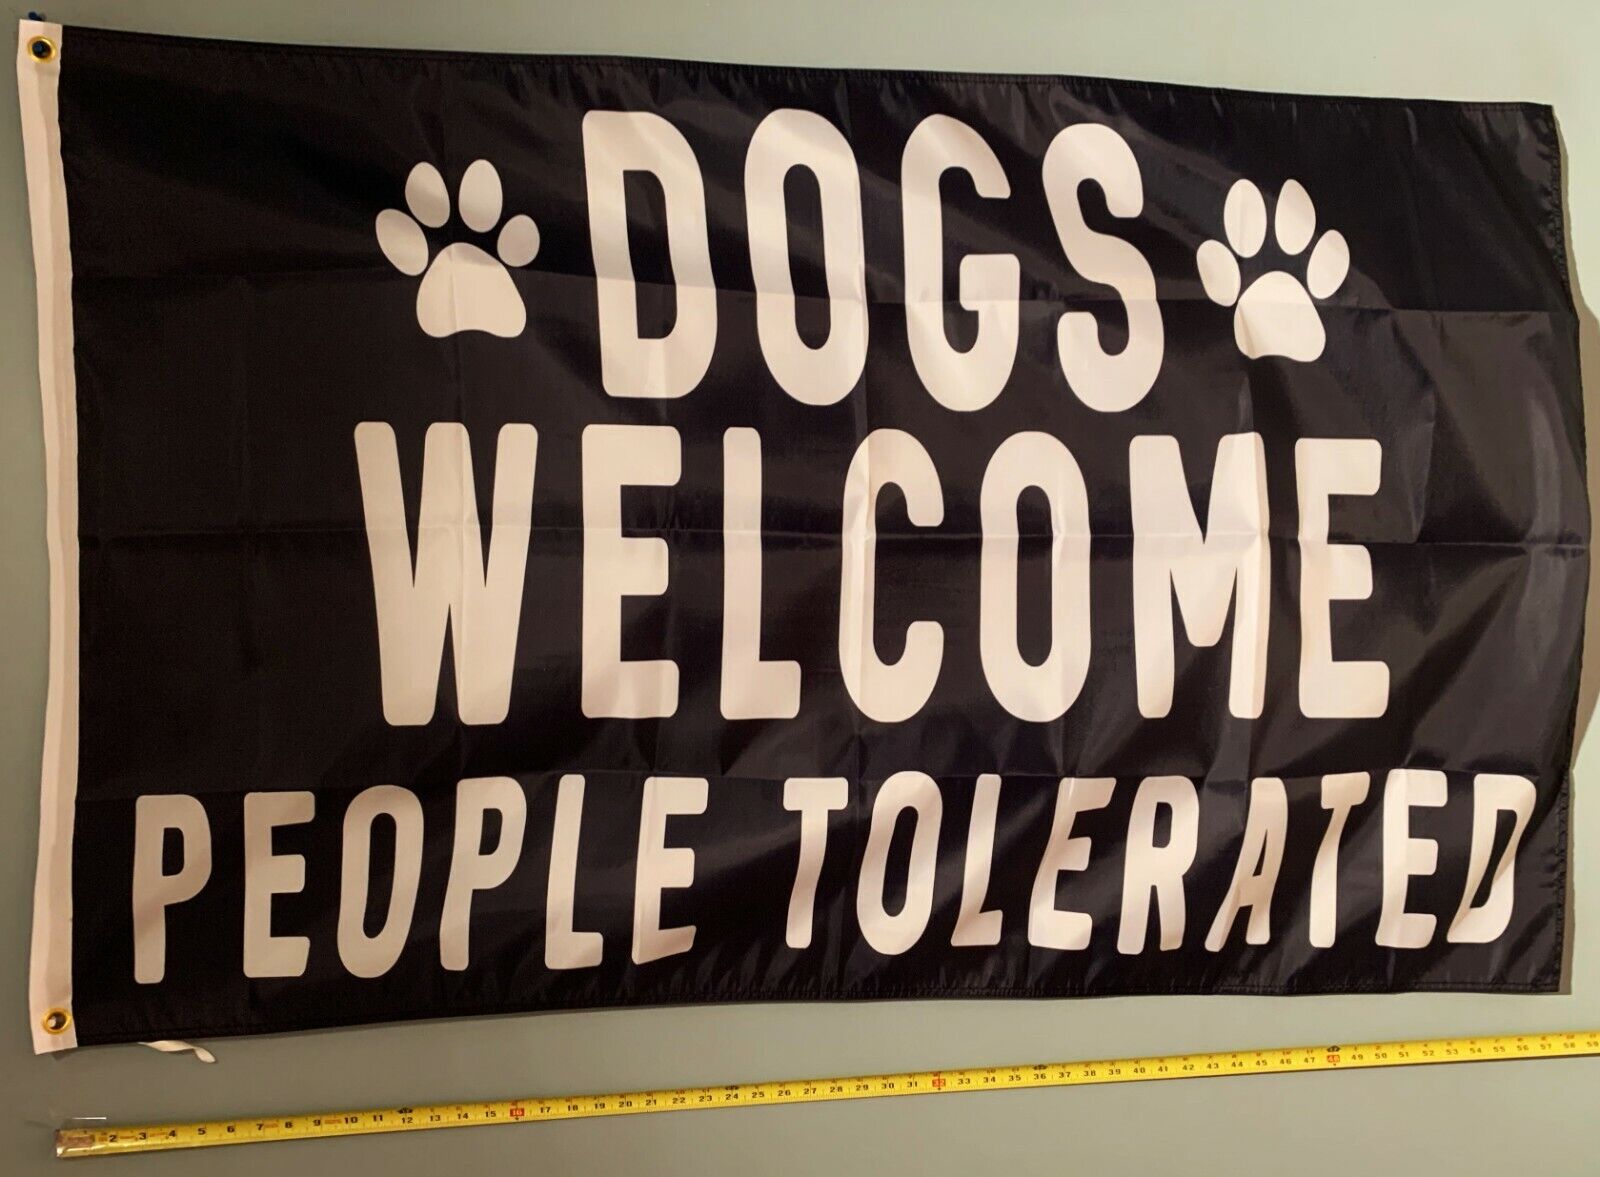 I LOVE DOGS FLAG *FREE SHIP USA SELLER Dogs Welcome People Tolerated Sign 3x5\'